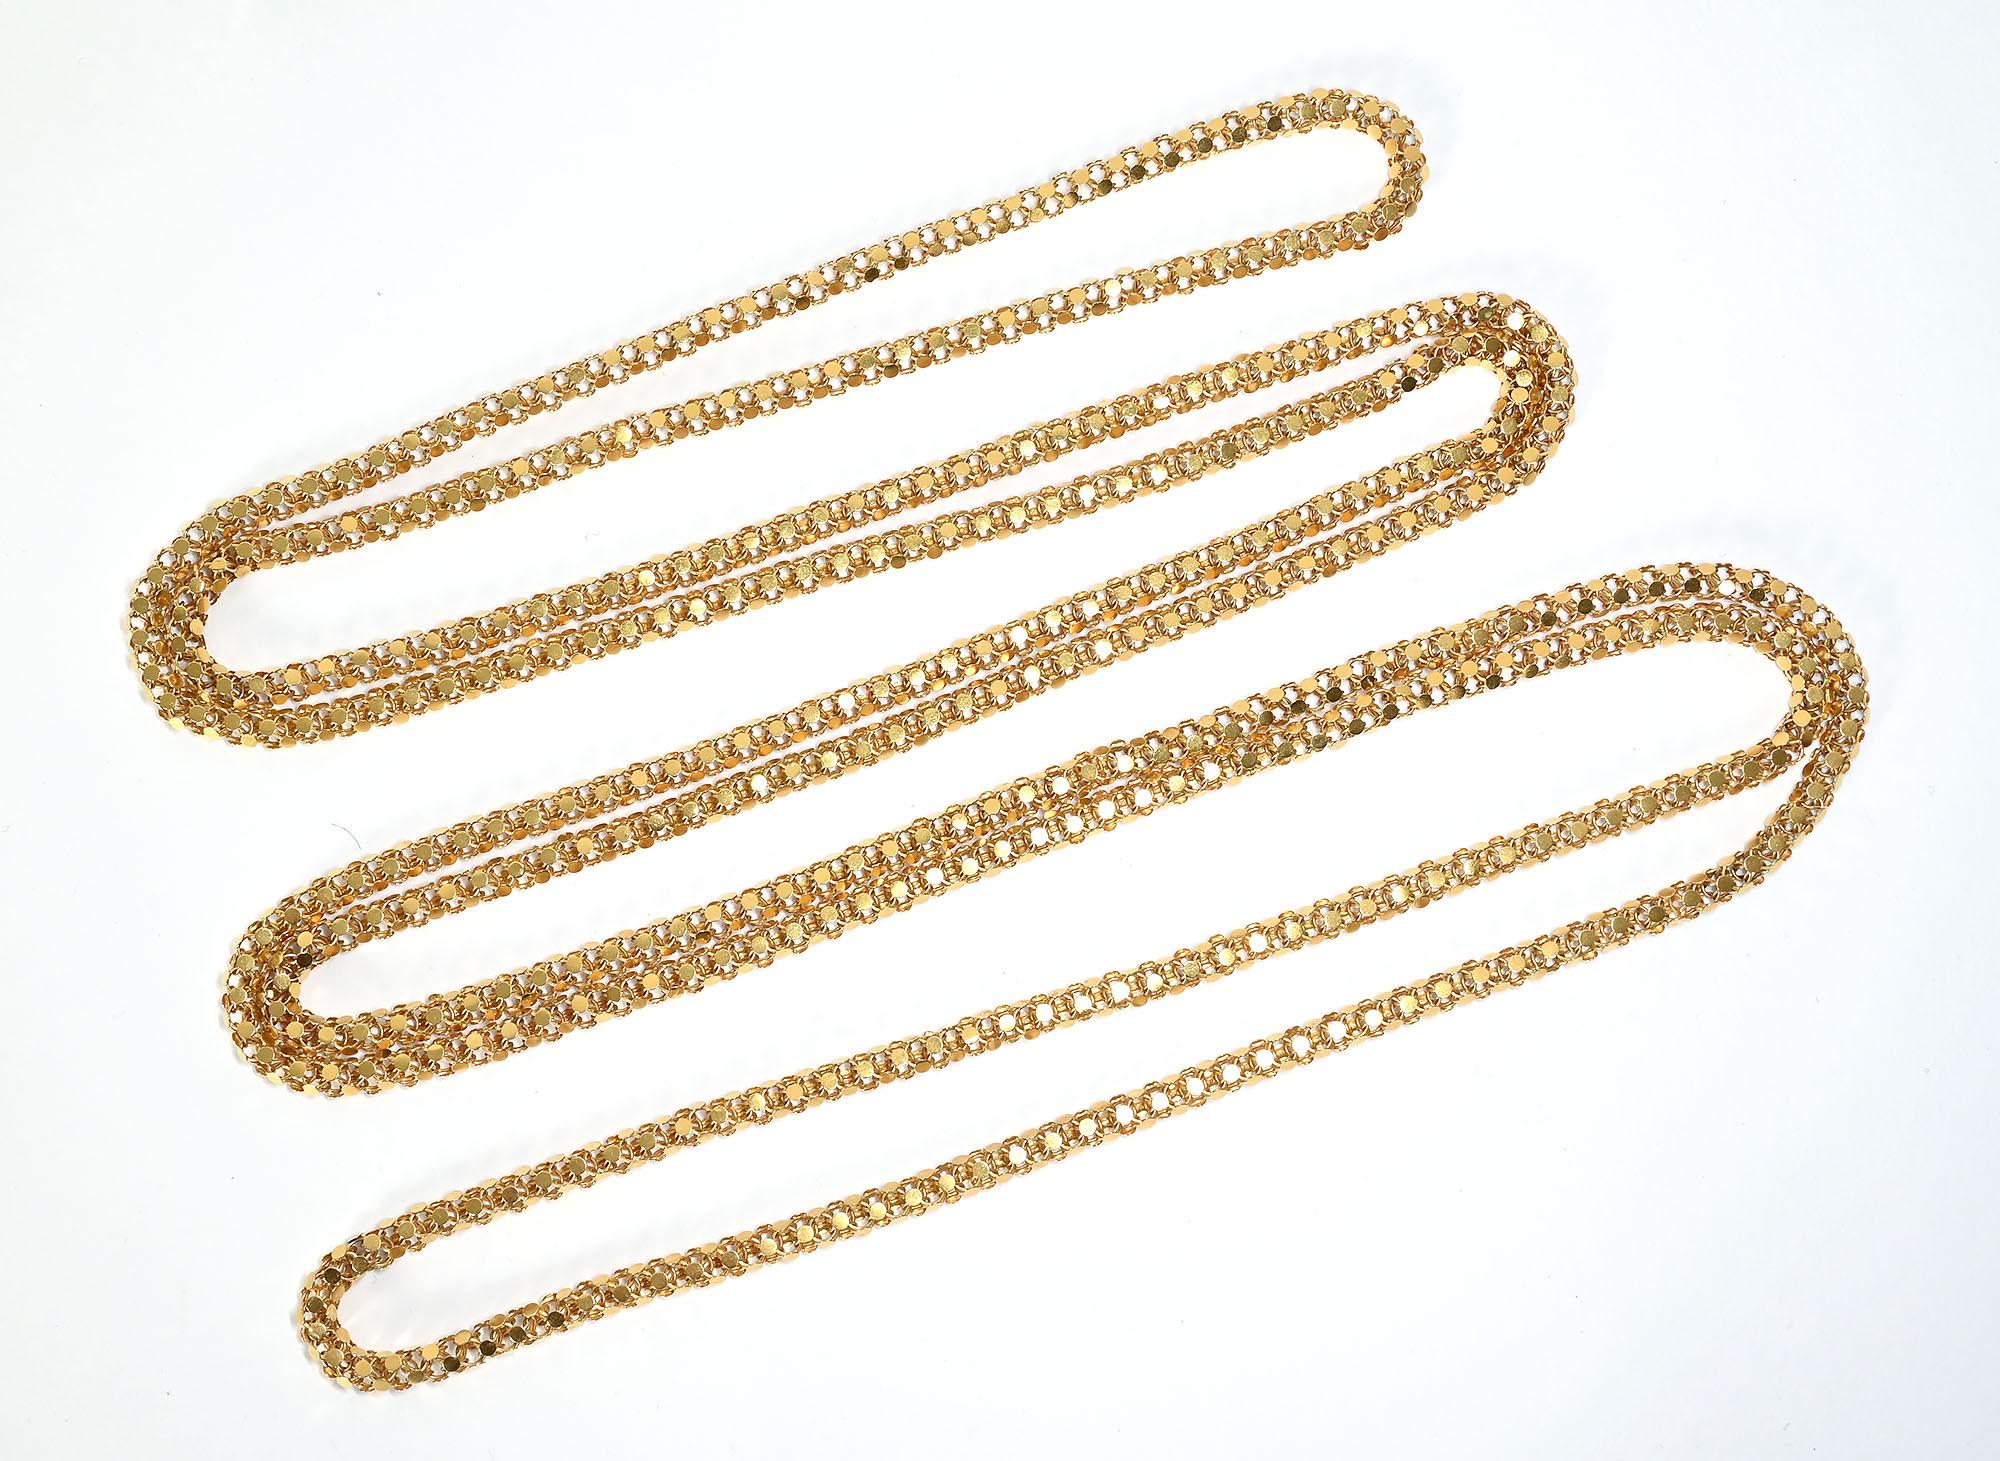 This unusually  long (78 inches) handmade necklace can be worn in a variety of lengths. The intricate chain is made of four gold circles around four open circles.  It is an endless chain (no clasp) that can be worn looped around two; three or four